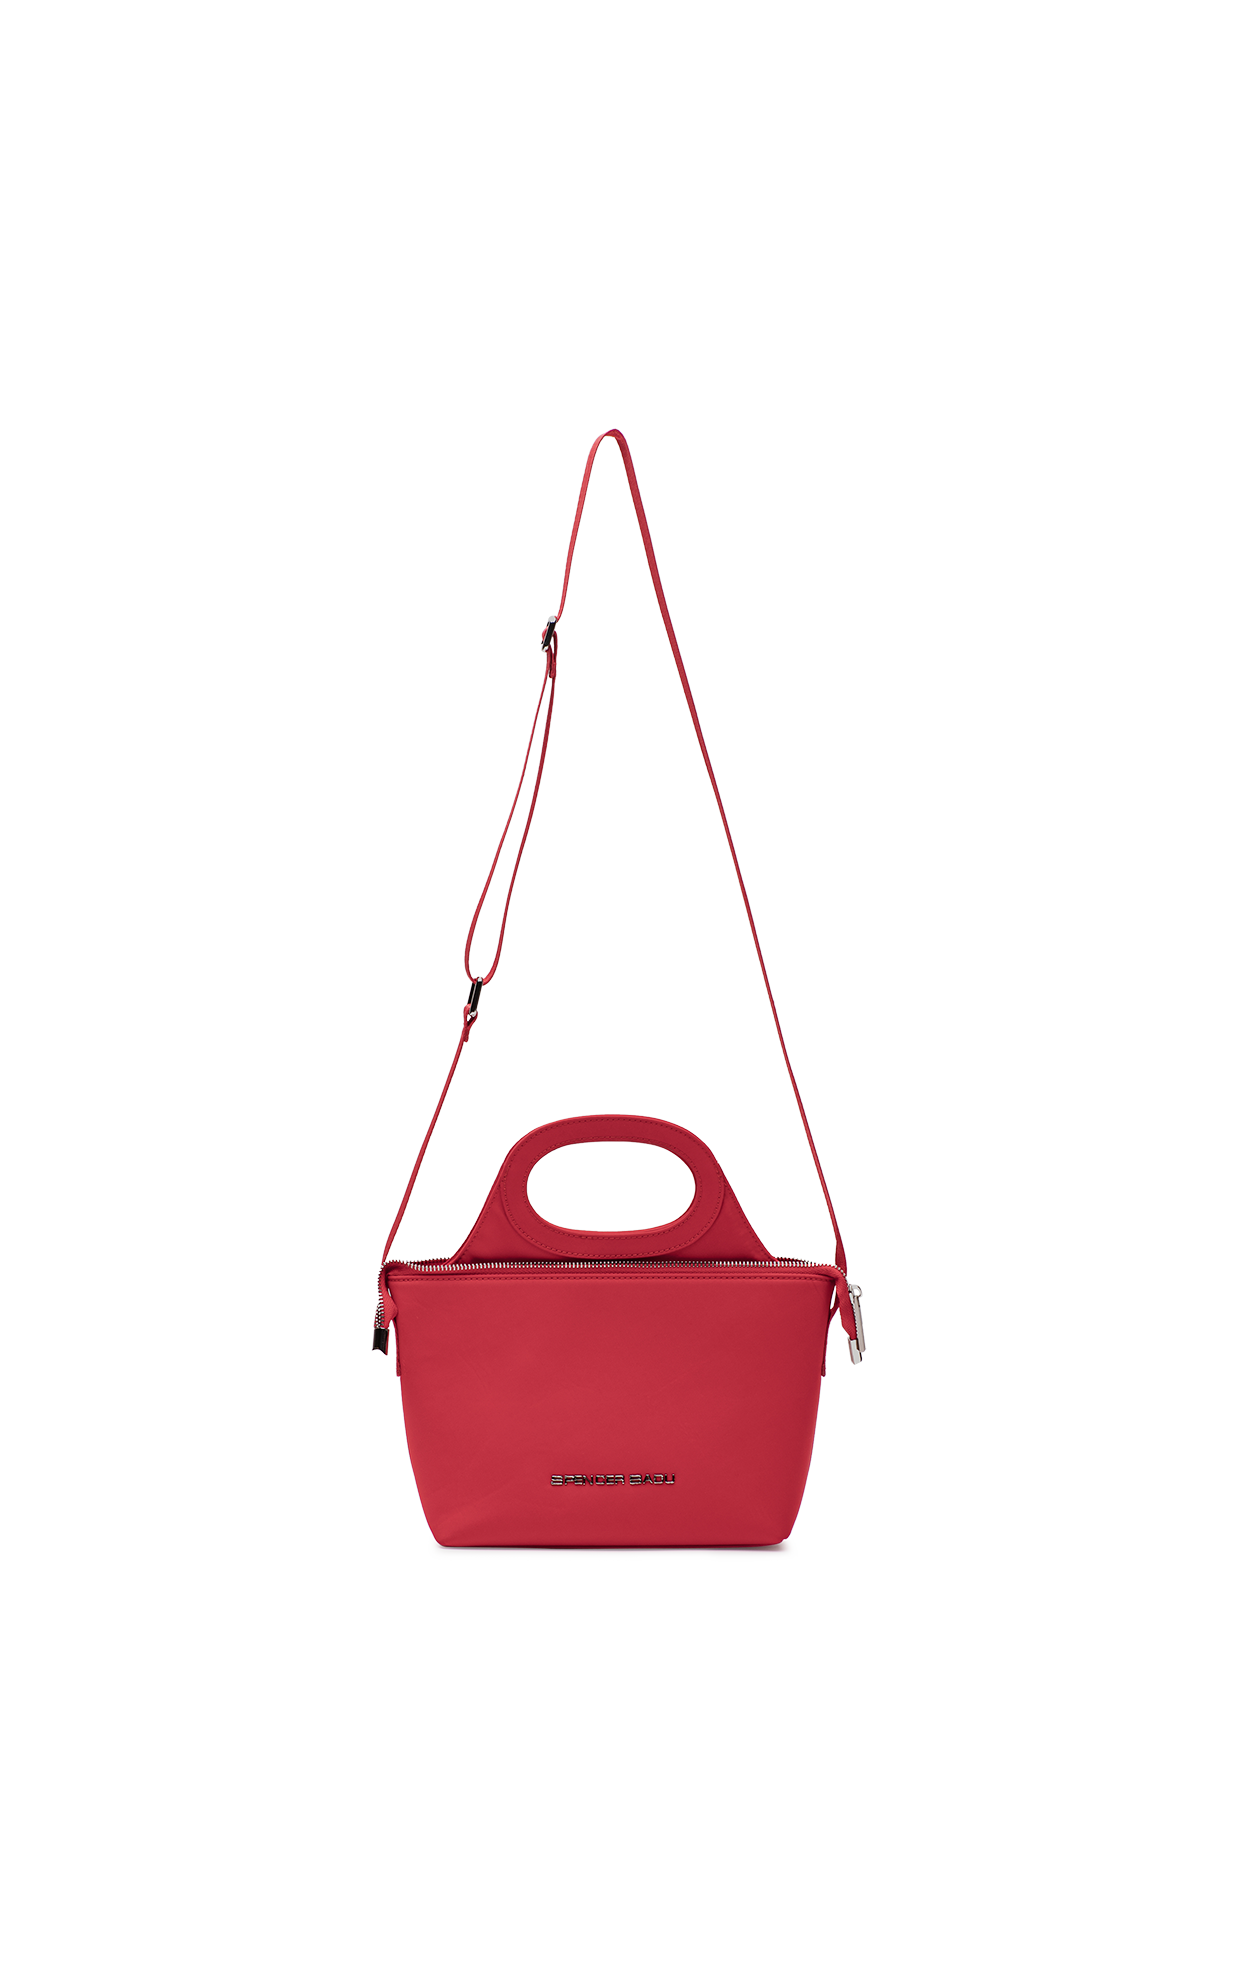 SMALL RED 2-IN-1 BAG